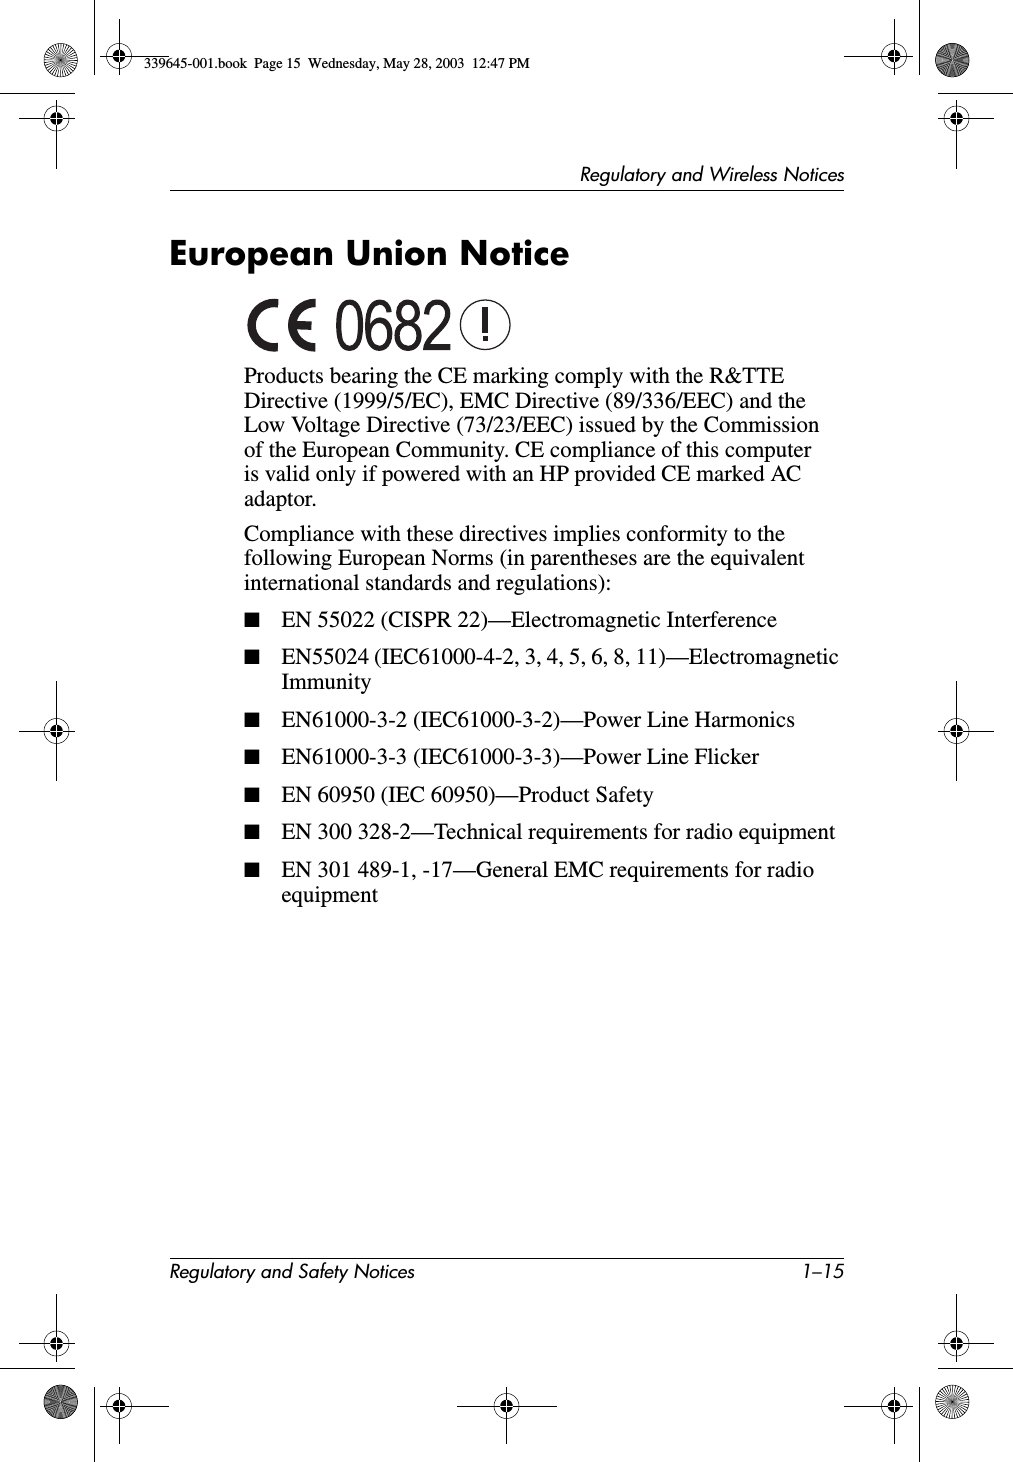 Regulatory and Wireless NoticesRegulatory and Safety Notices 1–15European Union NoticeProducts bearing the CE marking comply with the R&amp;TTE Directive (1999/5/EC), EMC Directive (89/336/EEC) and the Low Voltage Directive (73/23/EEC) issued by the Commission of the European Community. CE compliance of this computer is valid only if powered with an HP provided CE marked AC adaptor.Compliance with these directives implies conformity to the following European Norms (in parentheses are the equivalent international standards and regulations):■EN 55022 (CISPR 22)—Electromagnetic Interference■EN55024 (IEC61000-4-2, 3, 4, 5, 6, 8, 11)—Electromagnetic Immunity■EN61000-3-2 (IEC61000-3-2)—Power Line Harmonics■EN61000-3-3 (IEC61000-3-3)—Power Line Flicker■EN 60950 (IEC 60950)—Product Safety■EN 300 328-2—Technical requirements for radio equipment■EN 301 489-1, -17—General EMC requirements for radio equipment339645-001.book  Page 15  Wednesday, May 28, 2003  12:47 PM